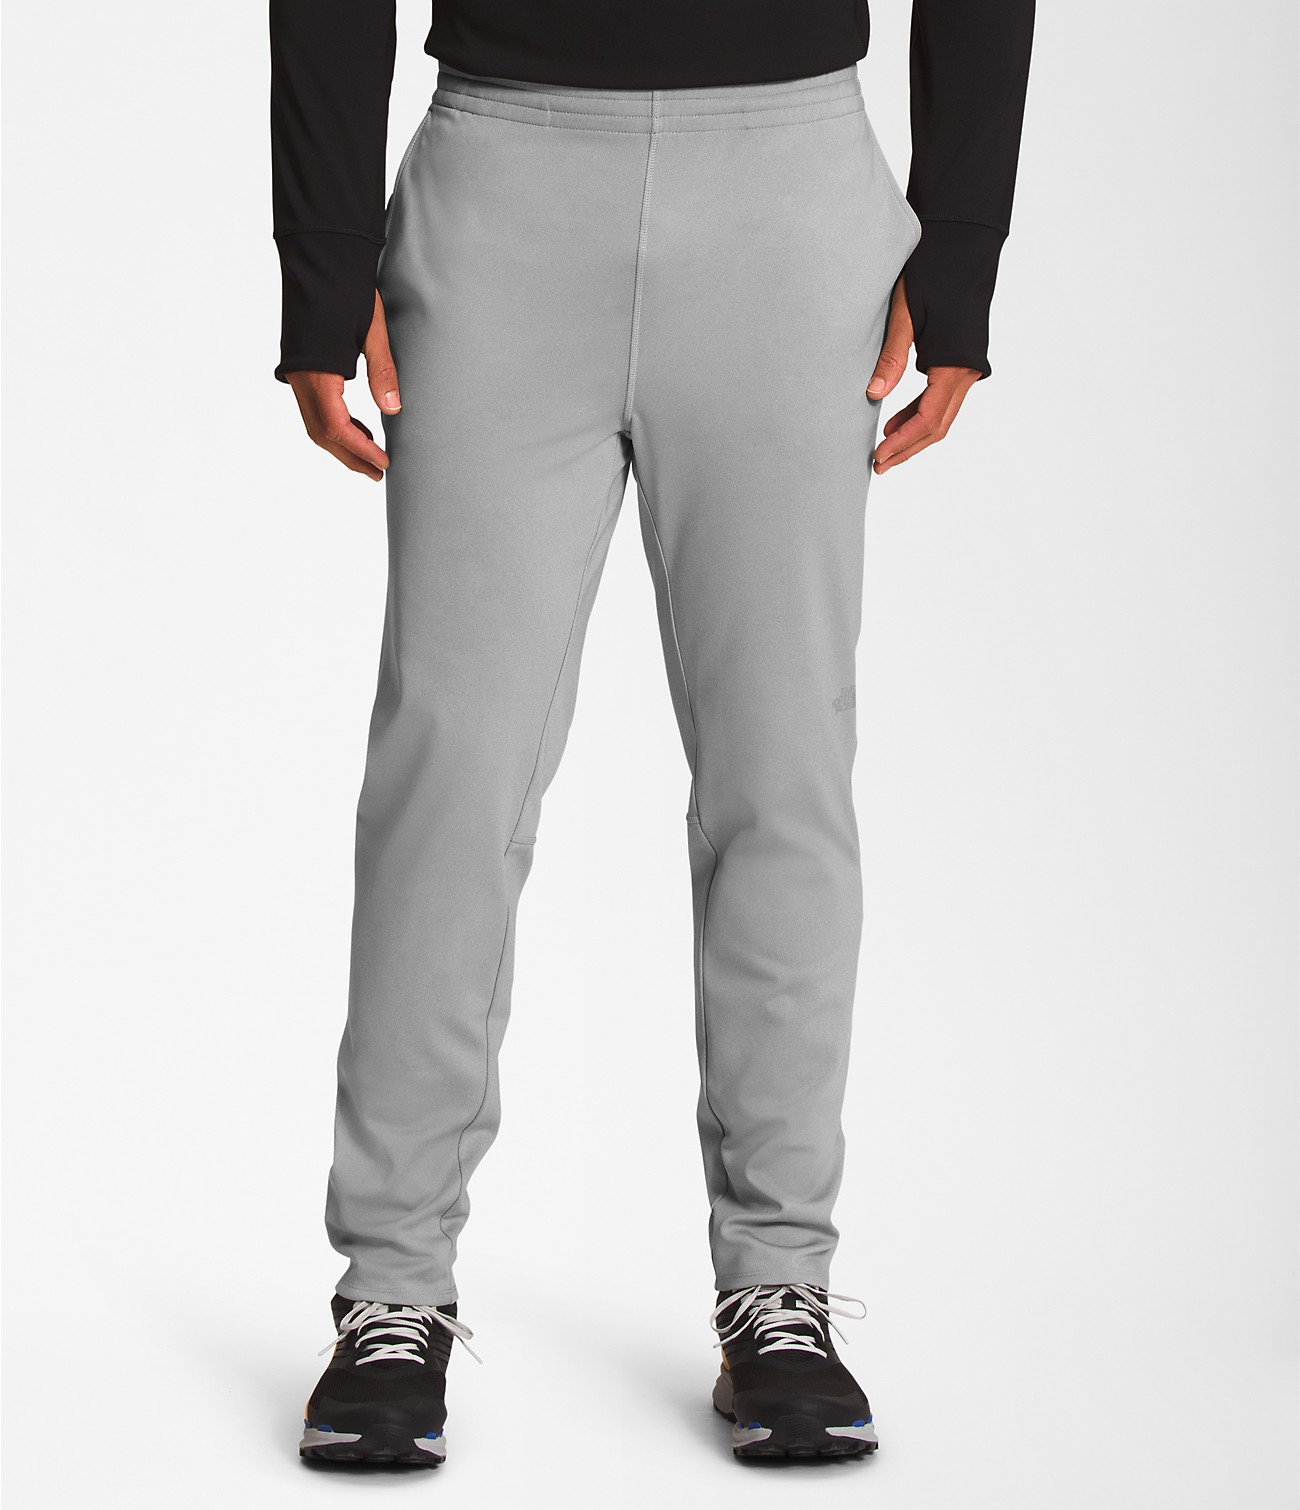 Men’s Winter Warm Essential Pants | The North Face